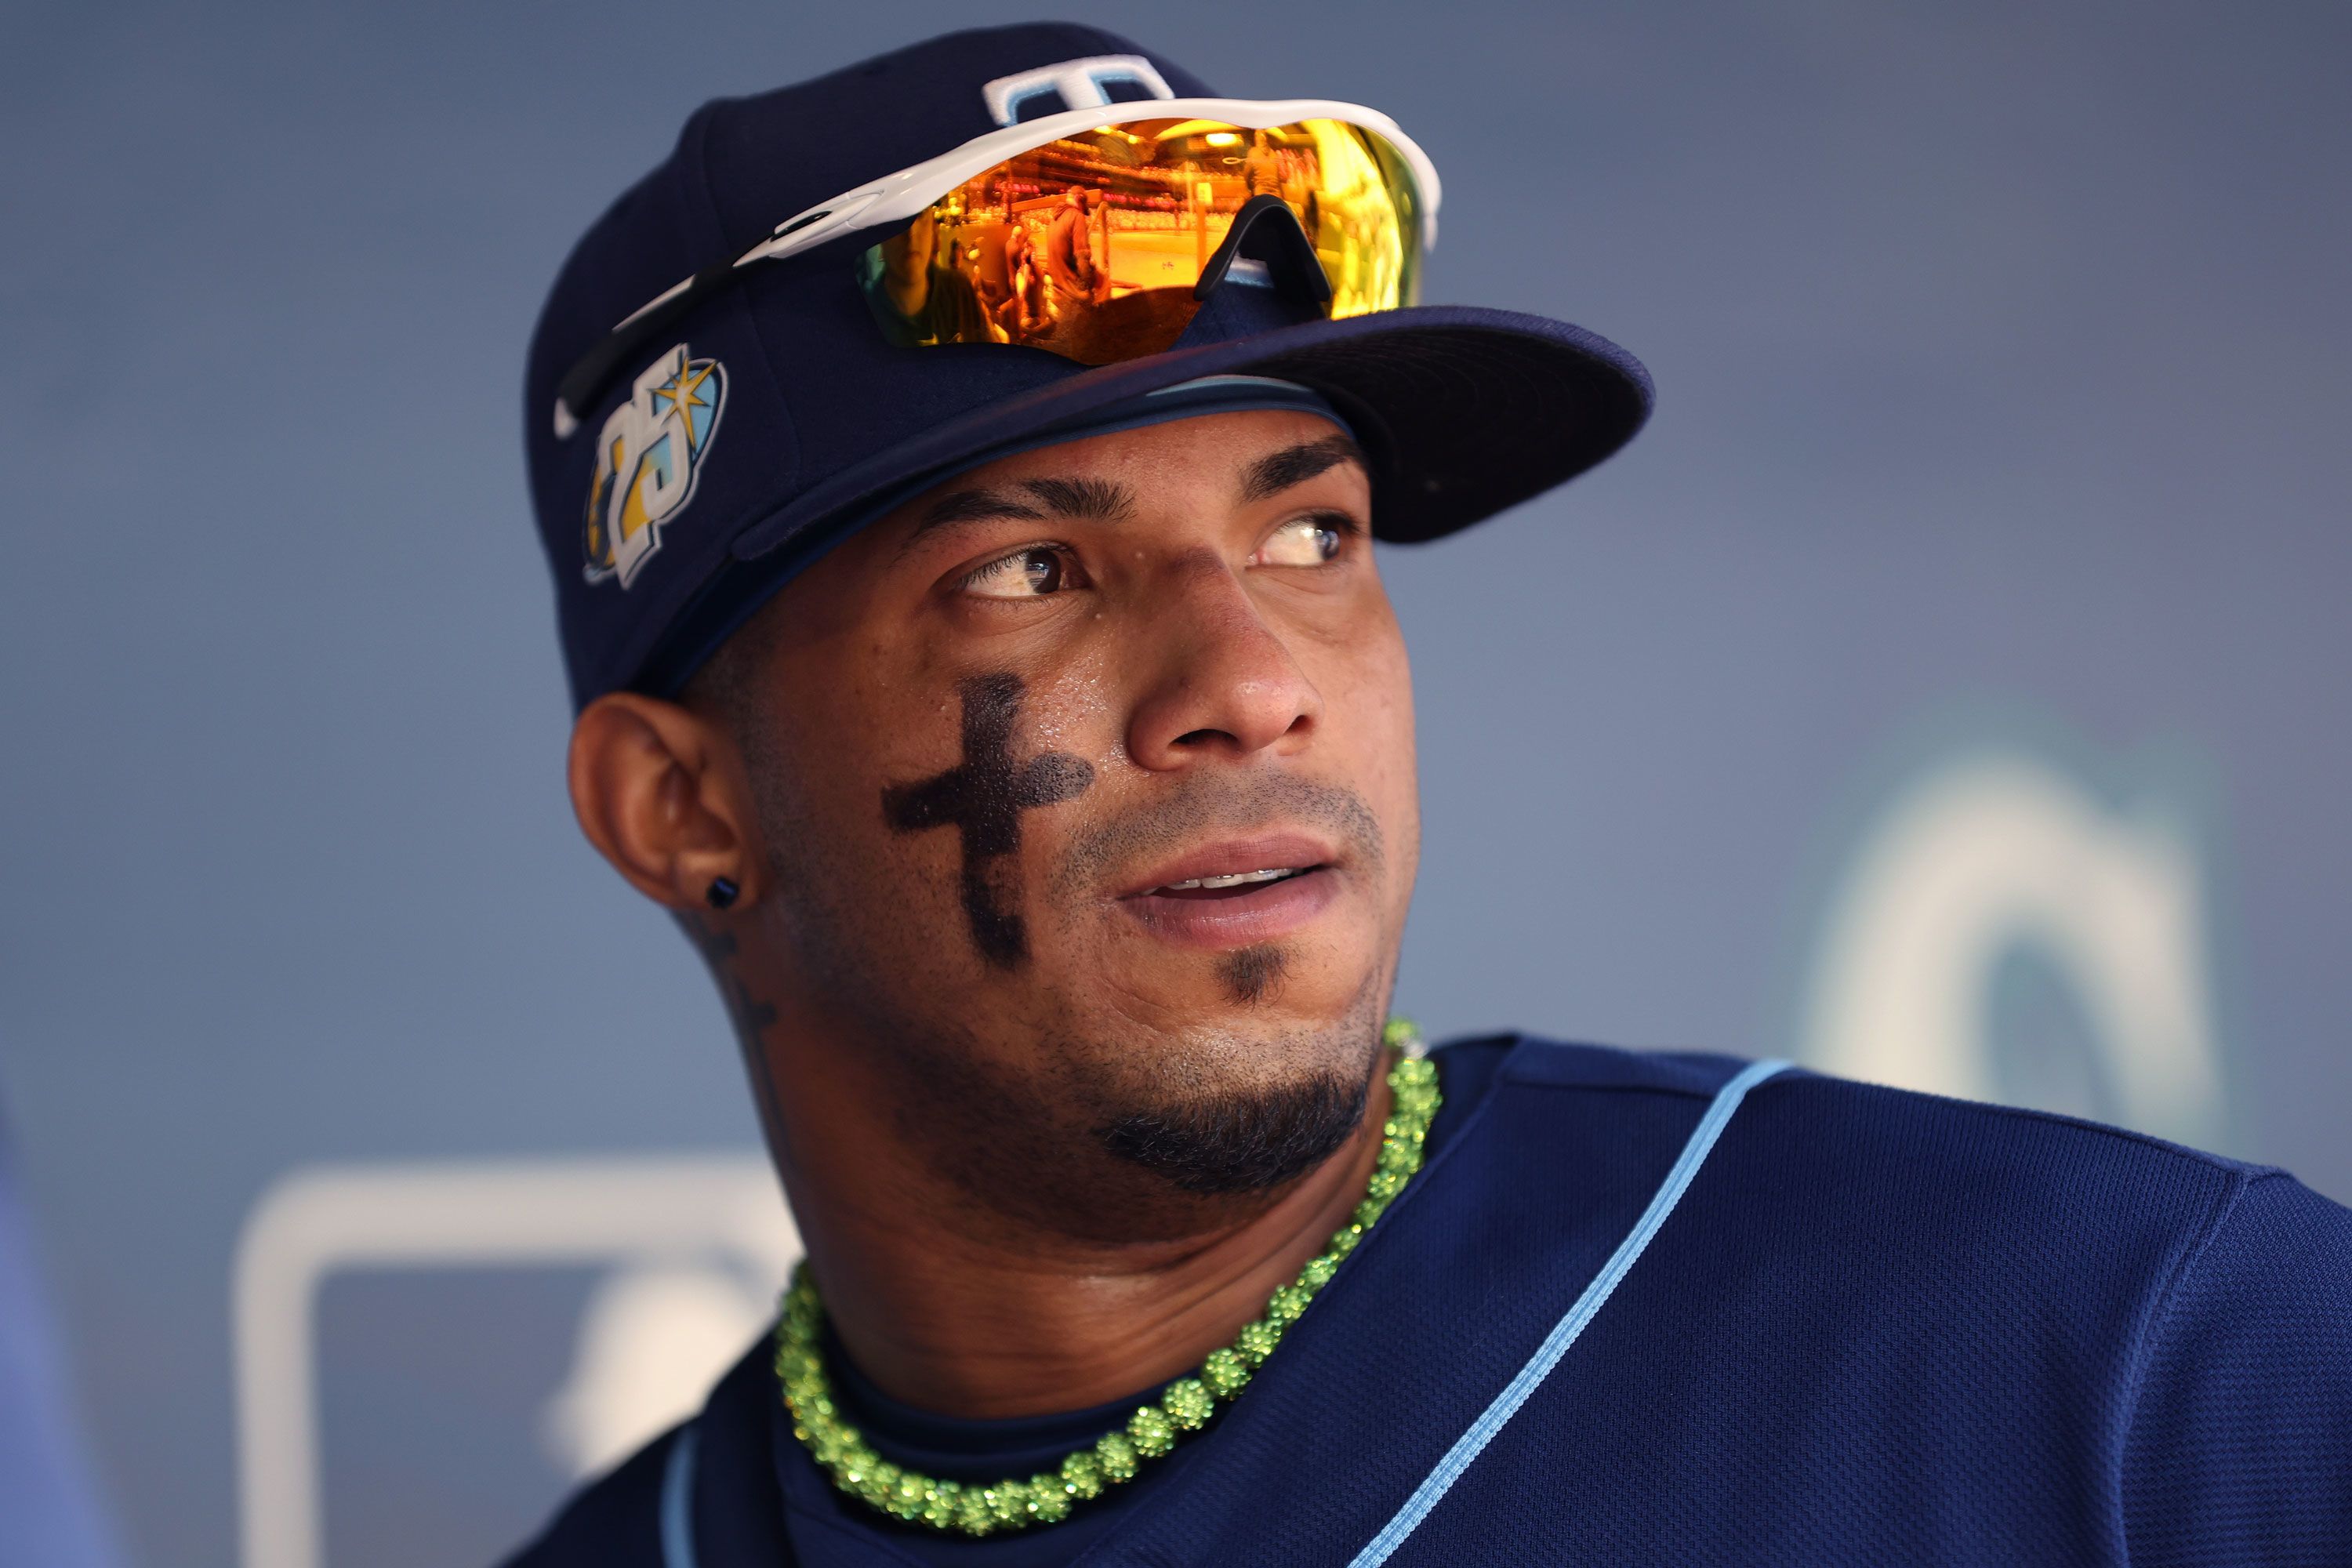 Meet Wander Franco, the Dominican Player Helping Tampa Bay Rays to Historic  Start